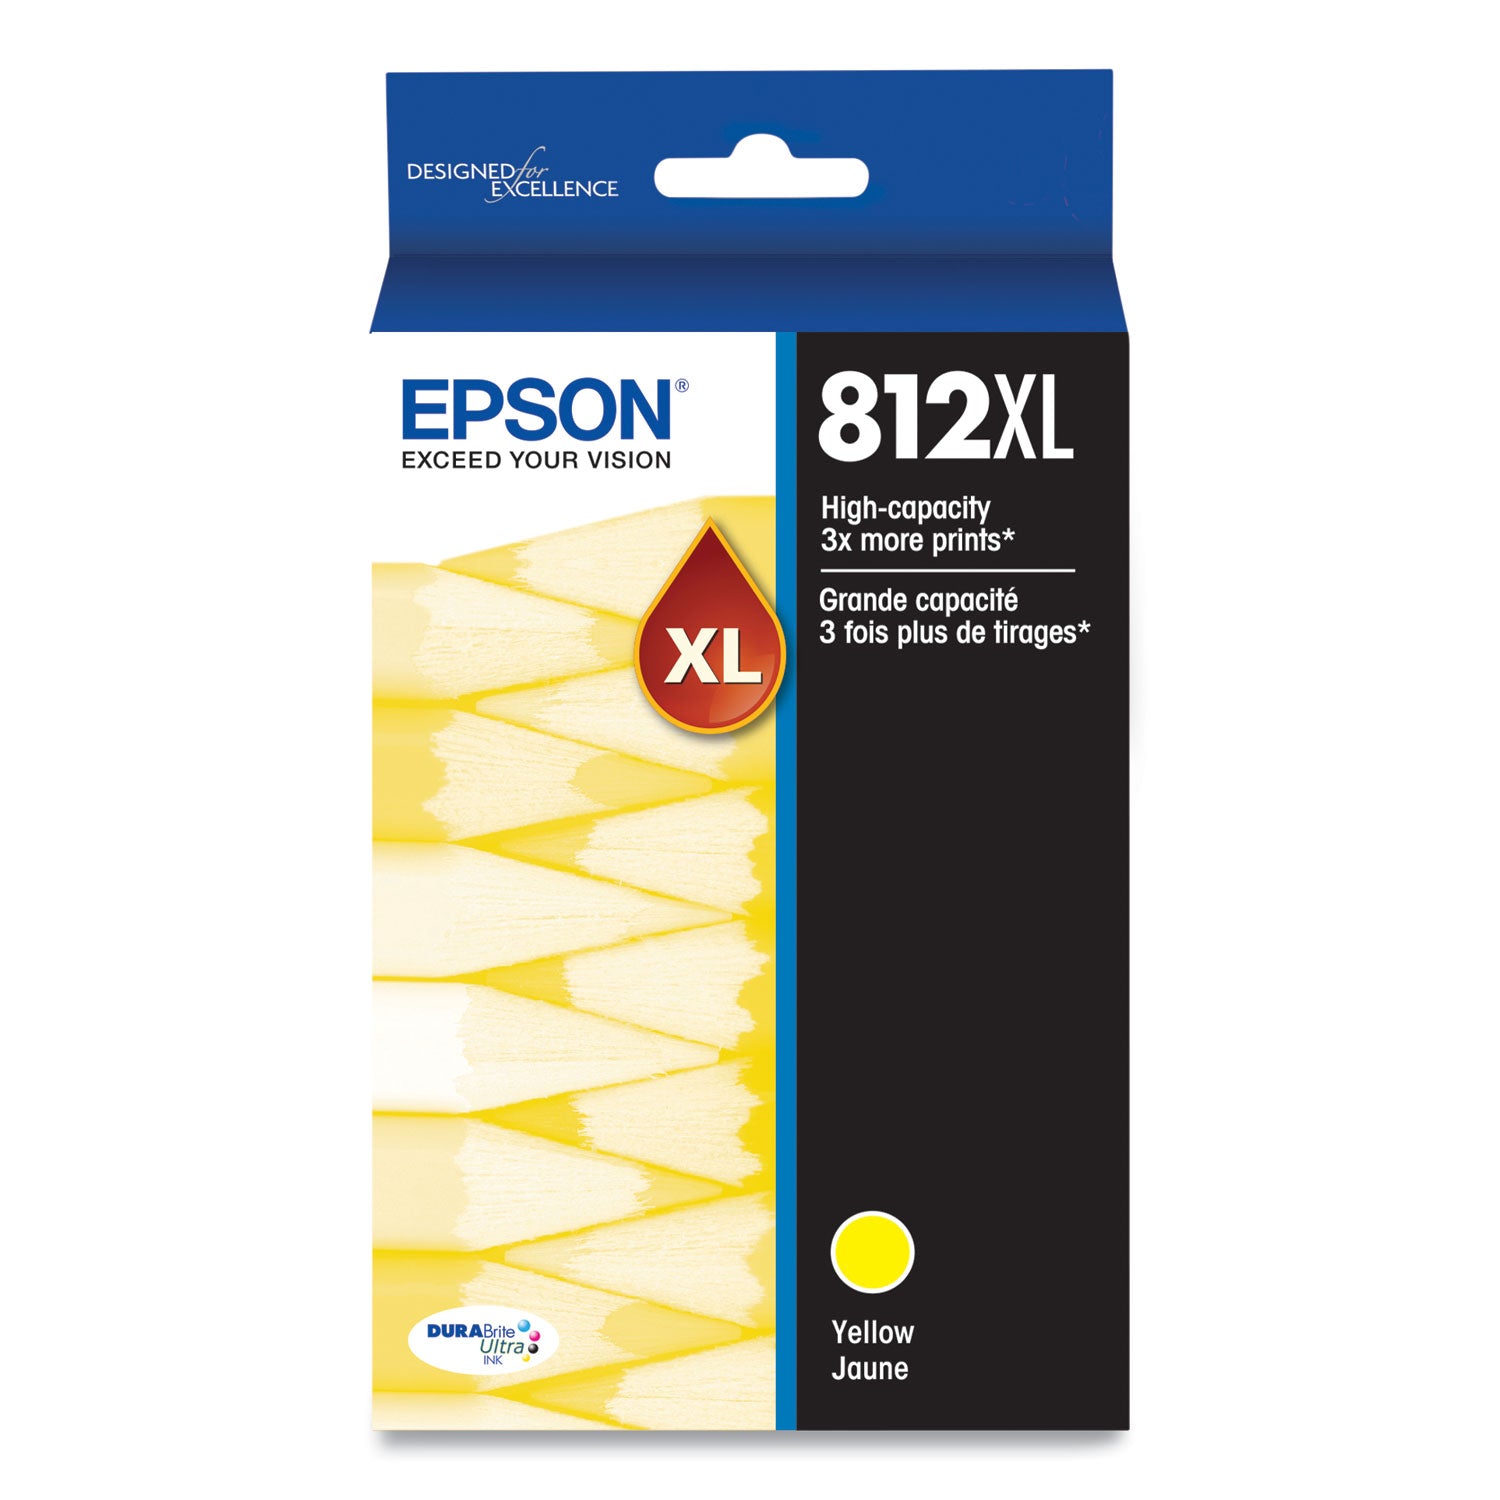 t812xl420-s-t812xl-durabrite-ultra-high-yield-ink-1100-page-yield-yellow_epst812xl420s - 1